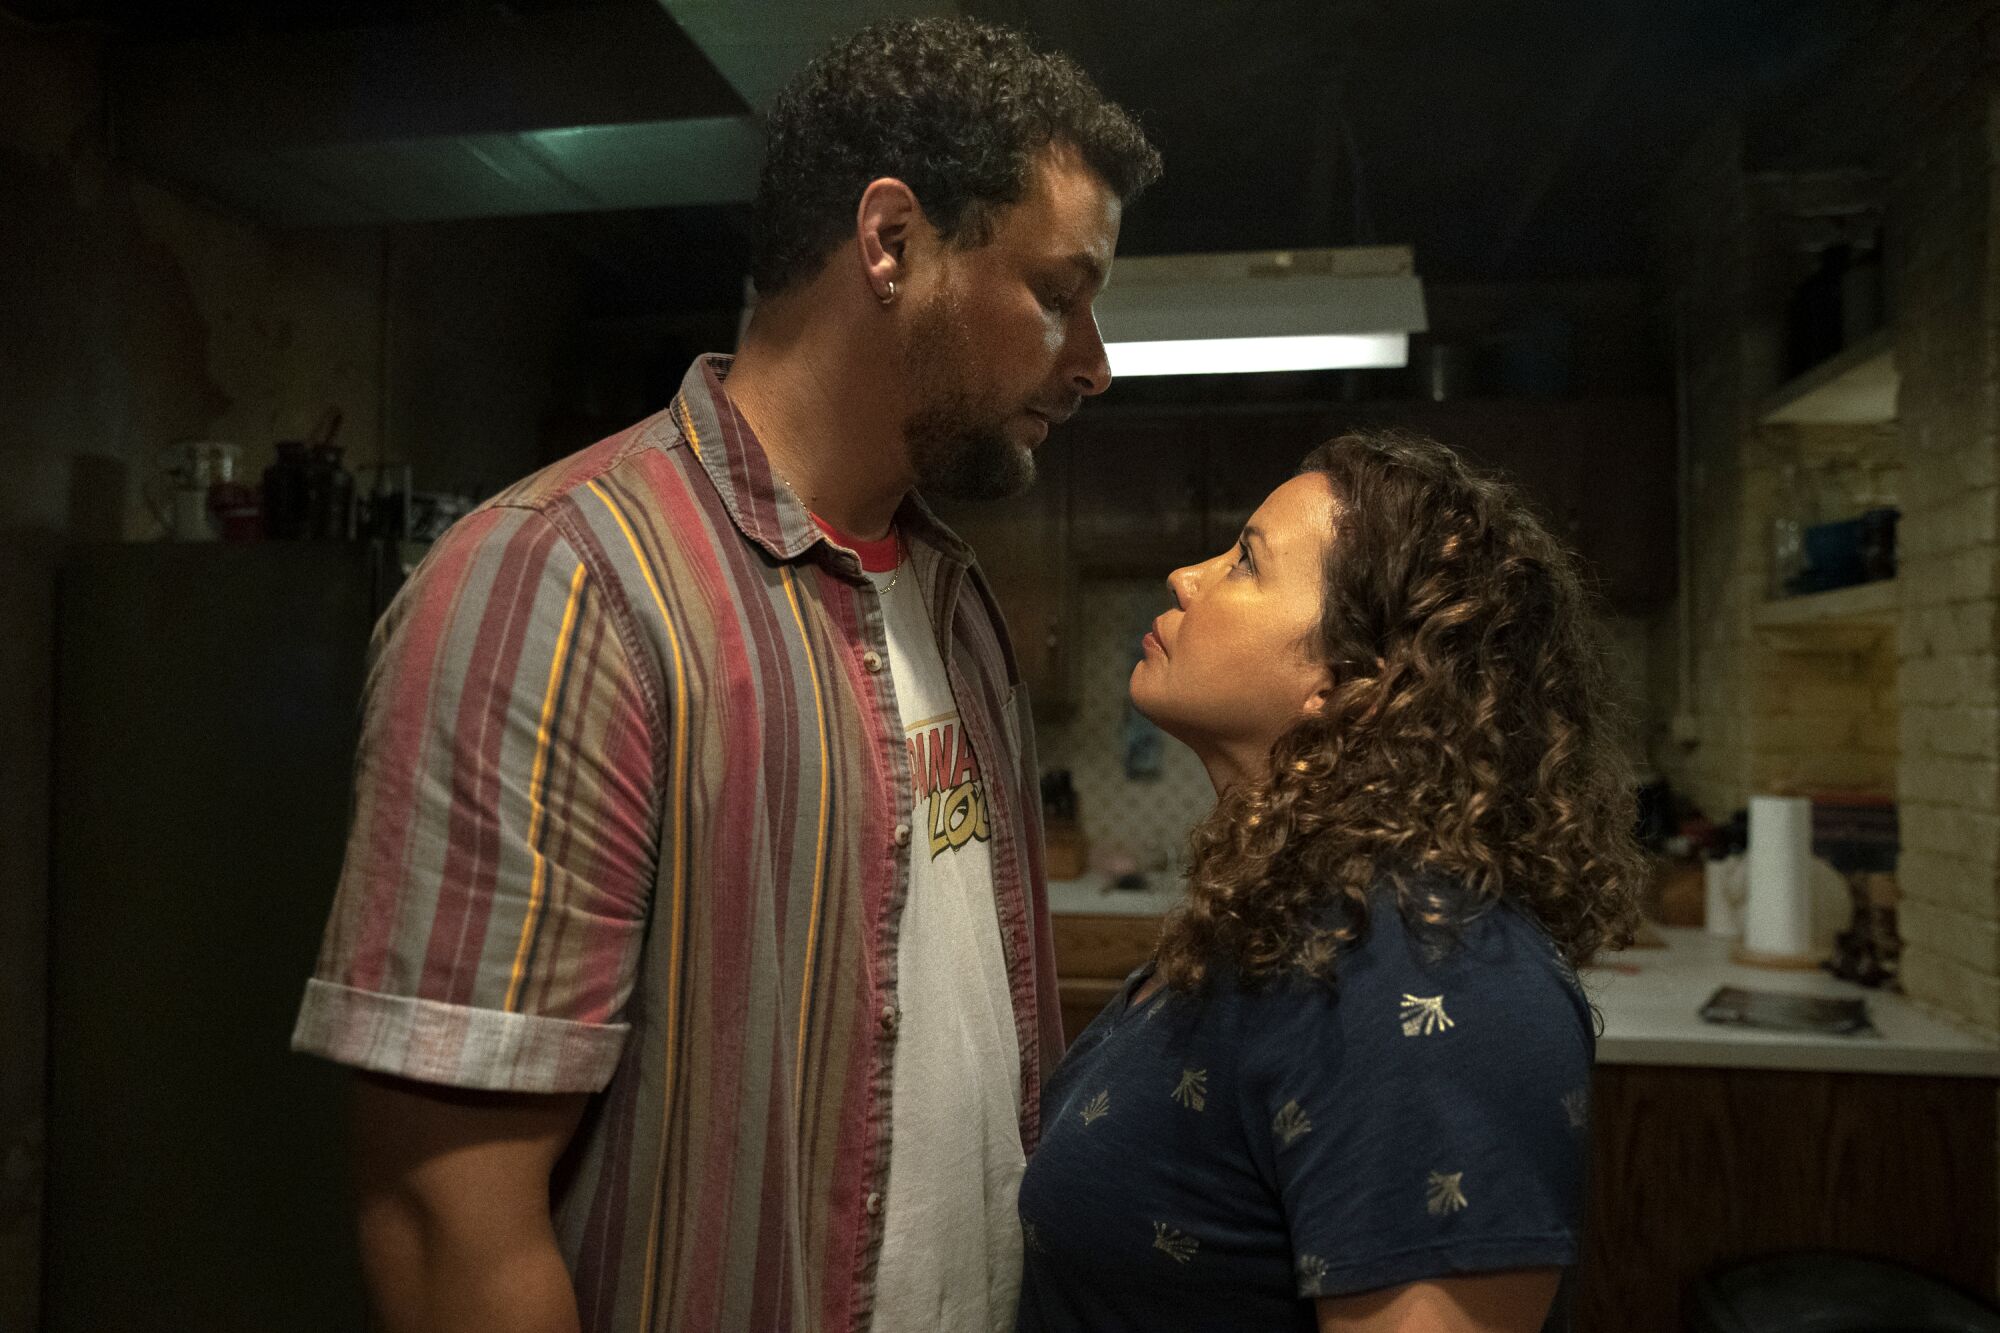 A man looks down at a woman with curly hair.